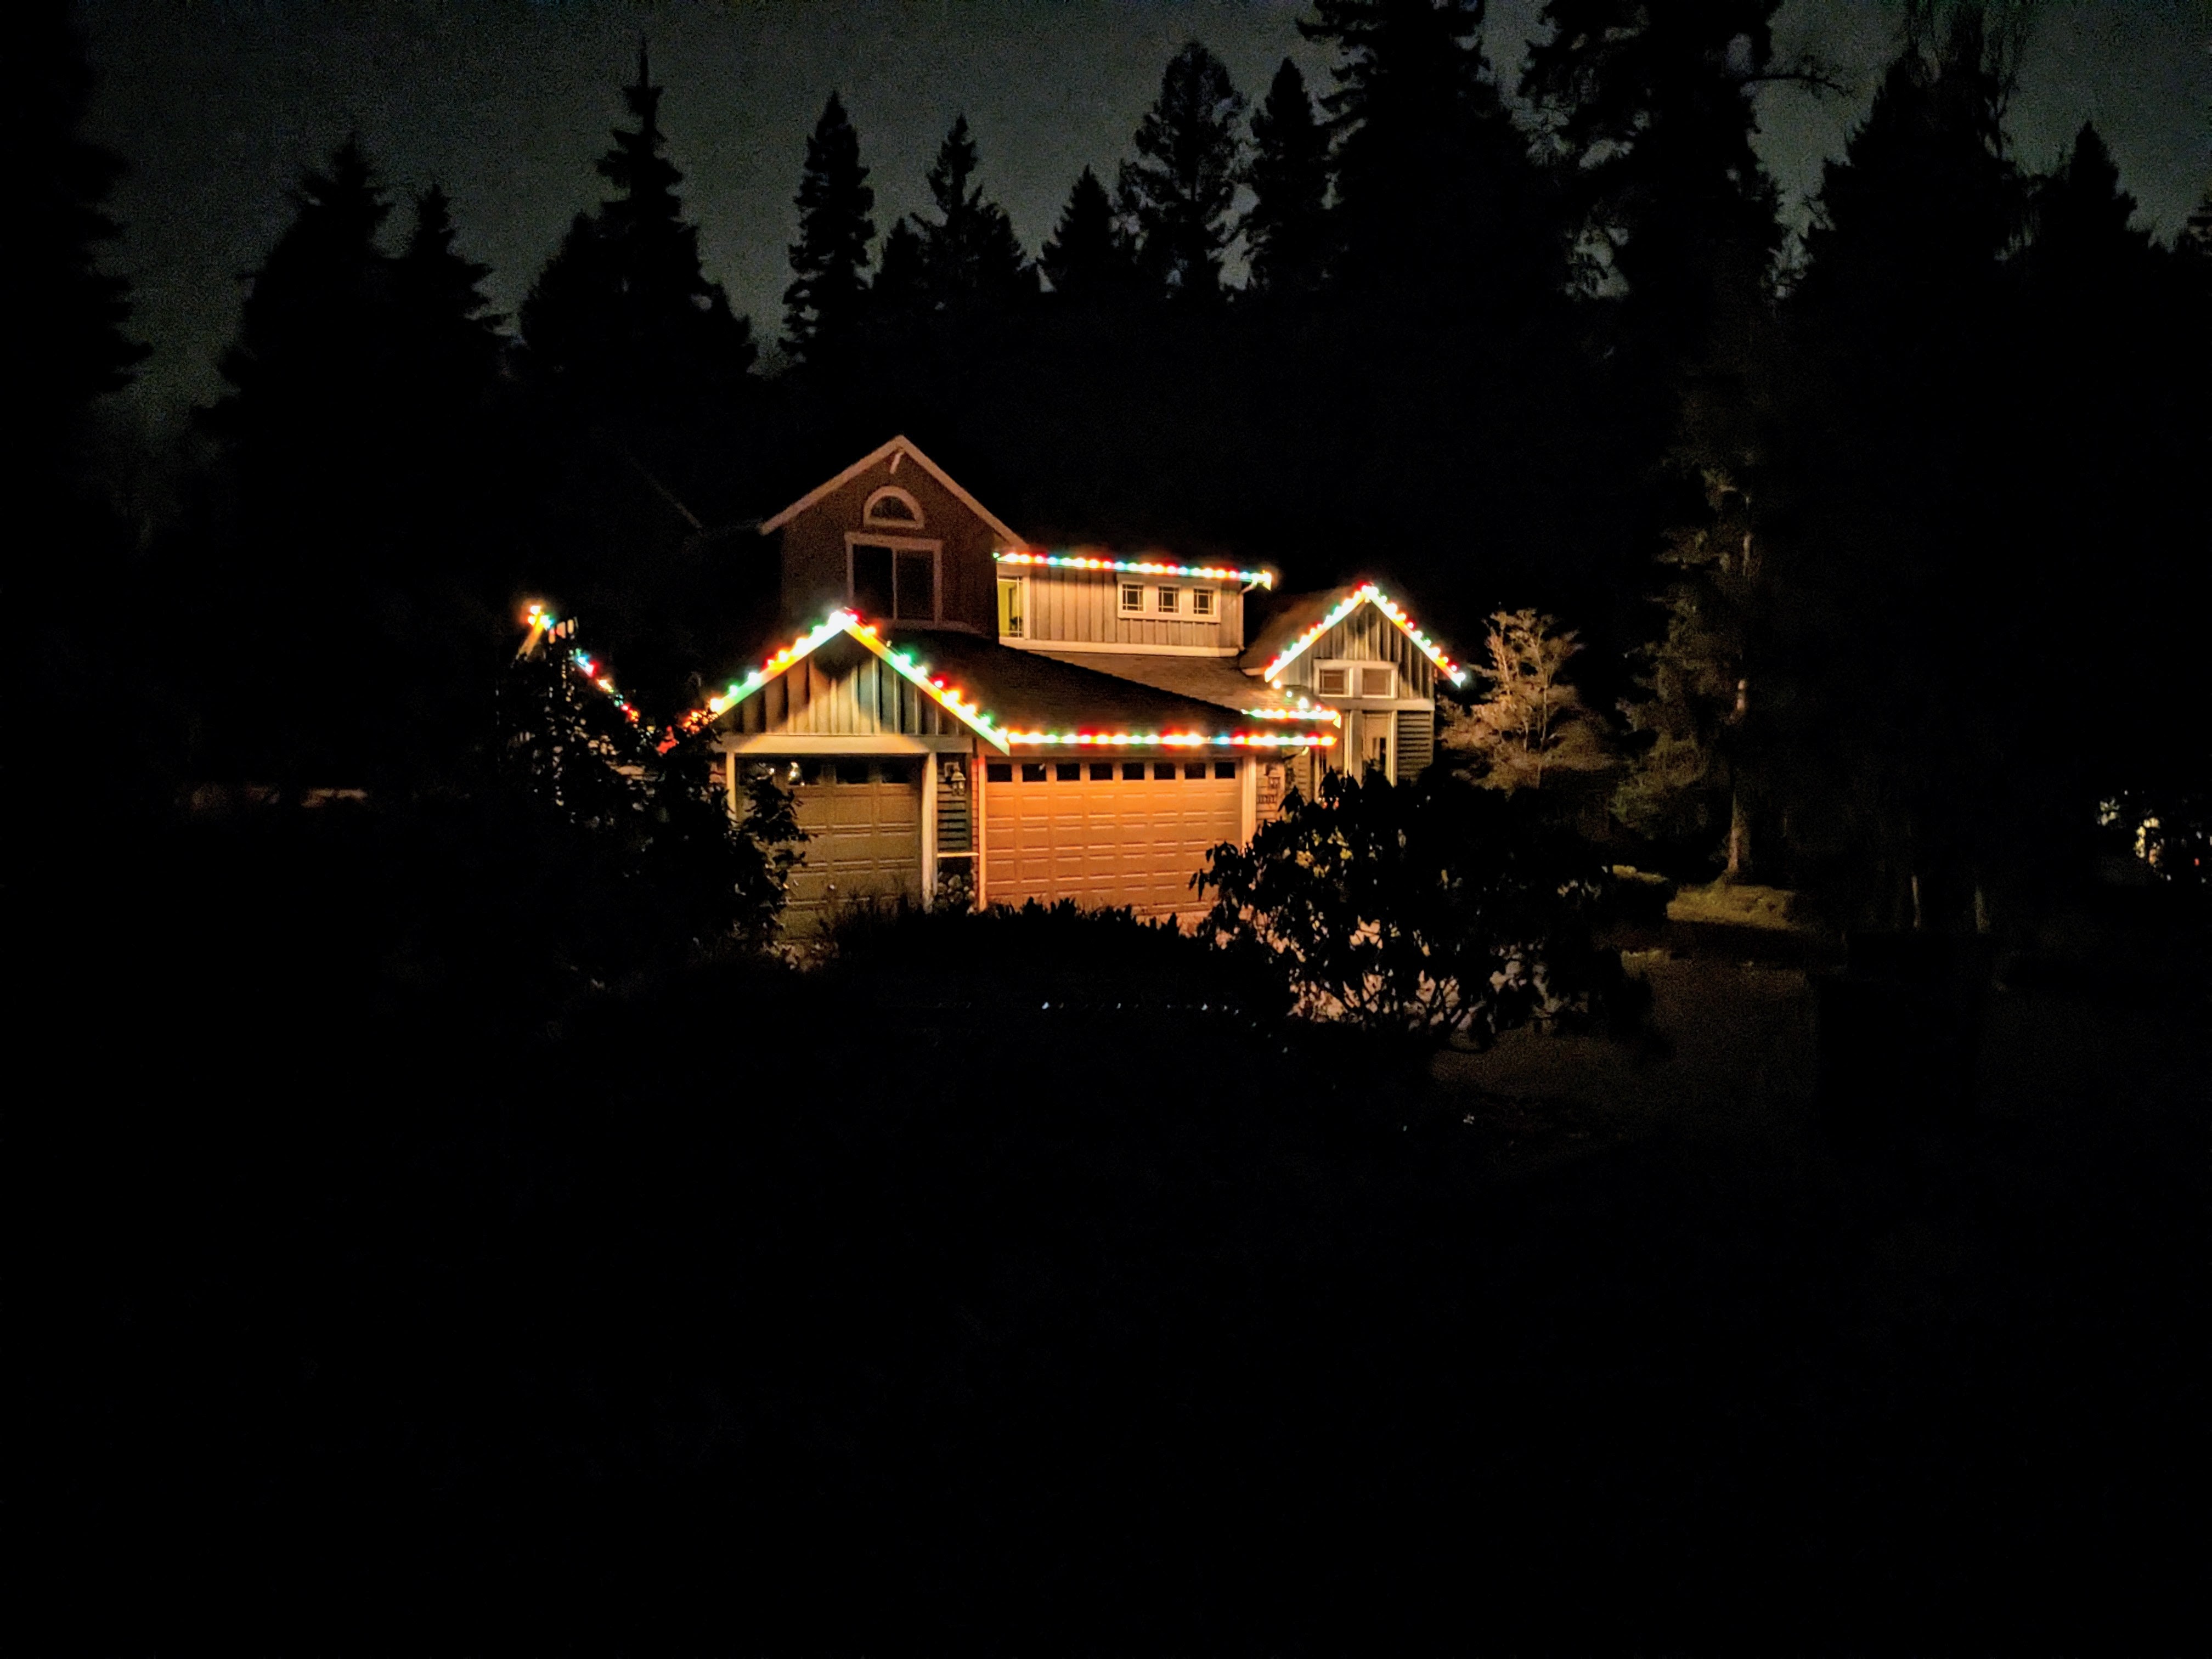 Our gingerbread house in the dark